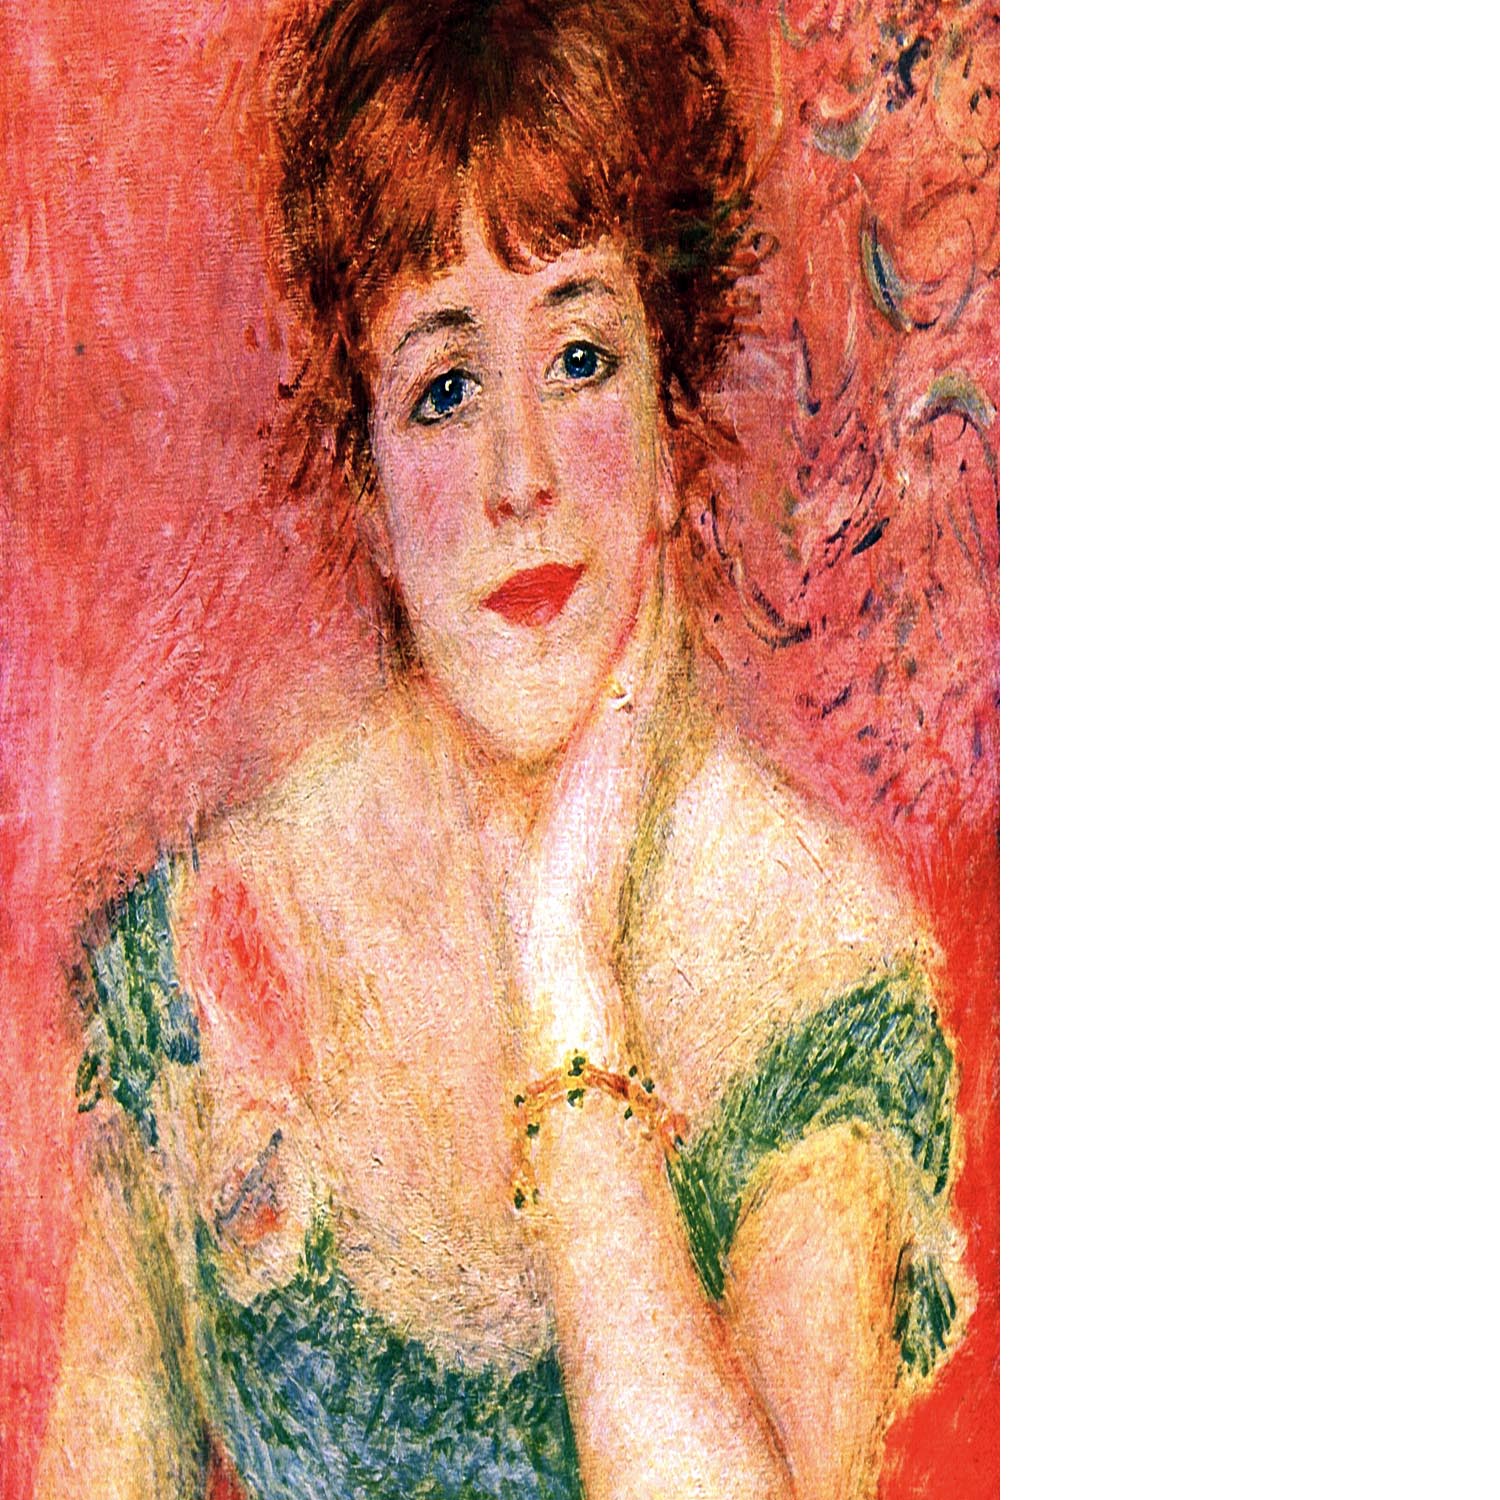 Portrait of Jeanne Samary by Renoir Floating Framed Canvas